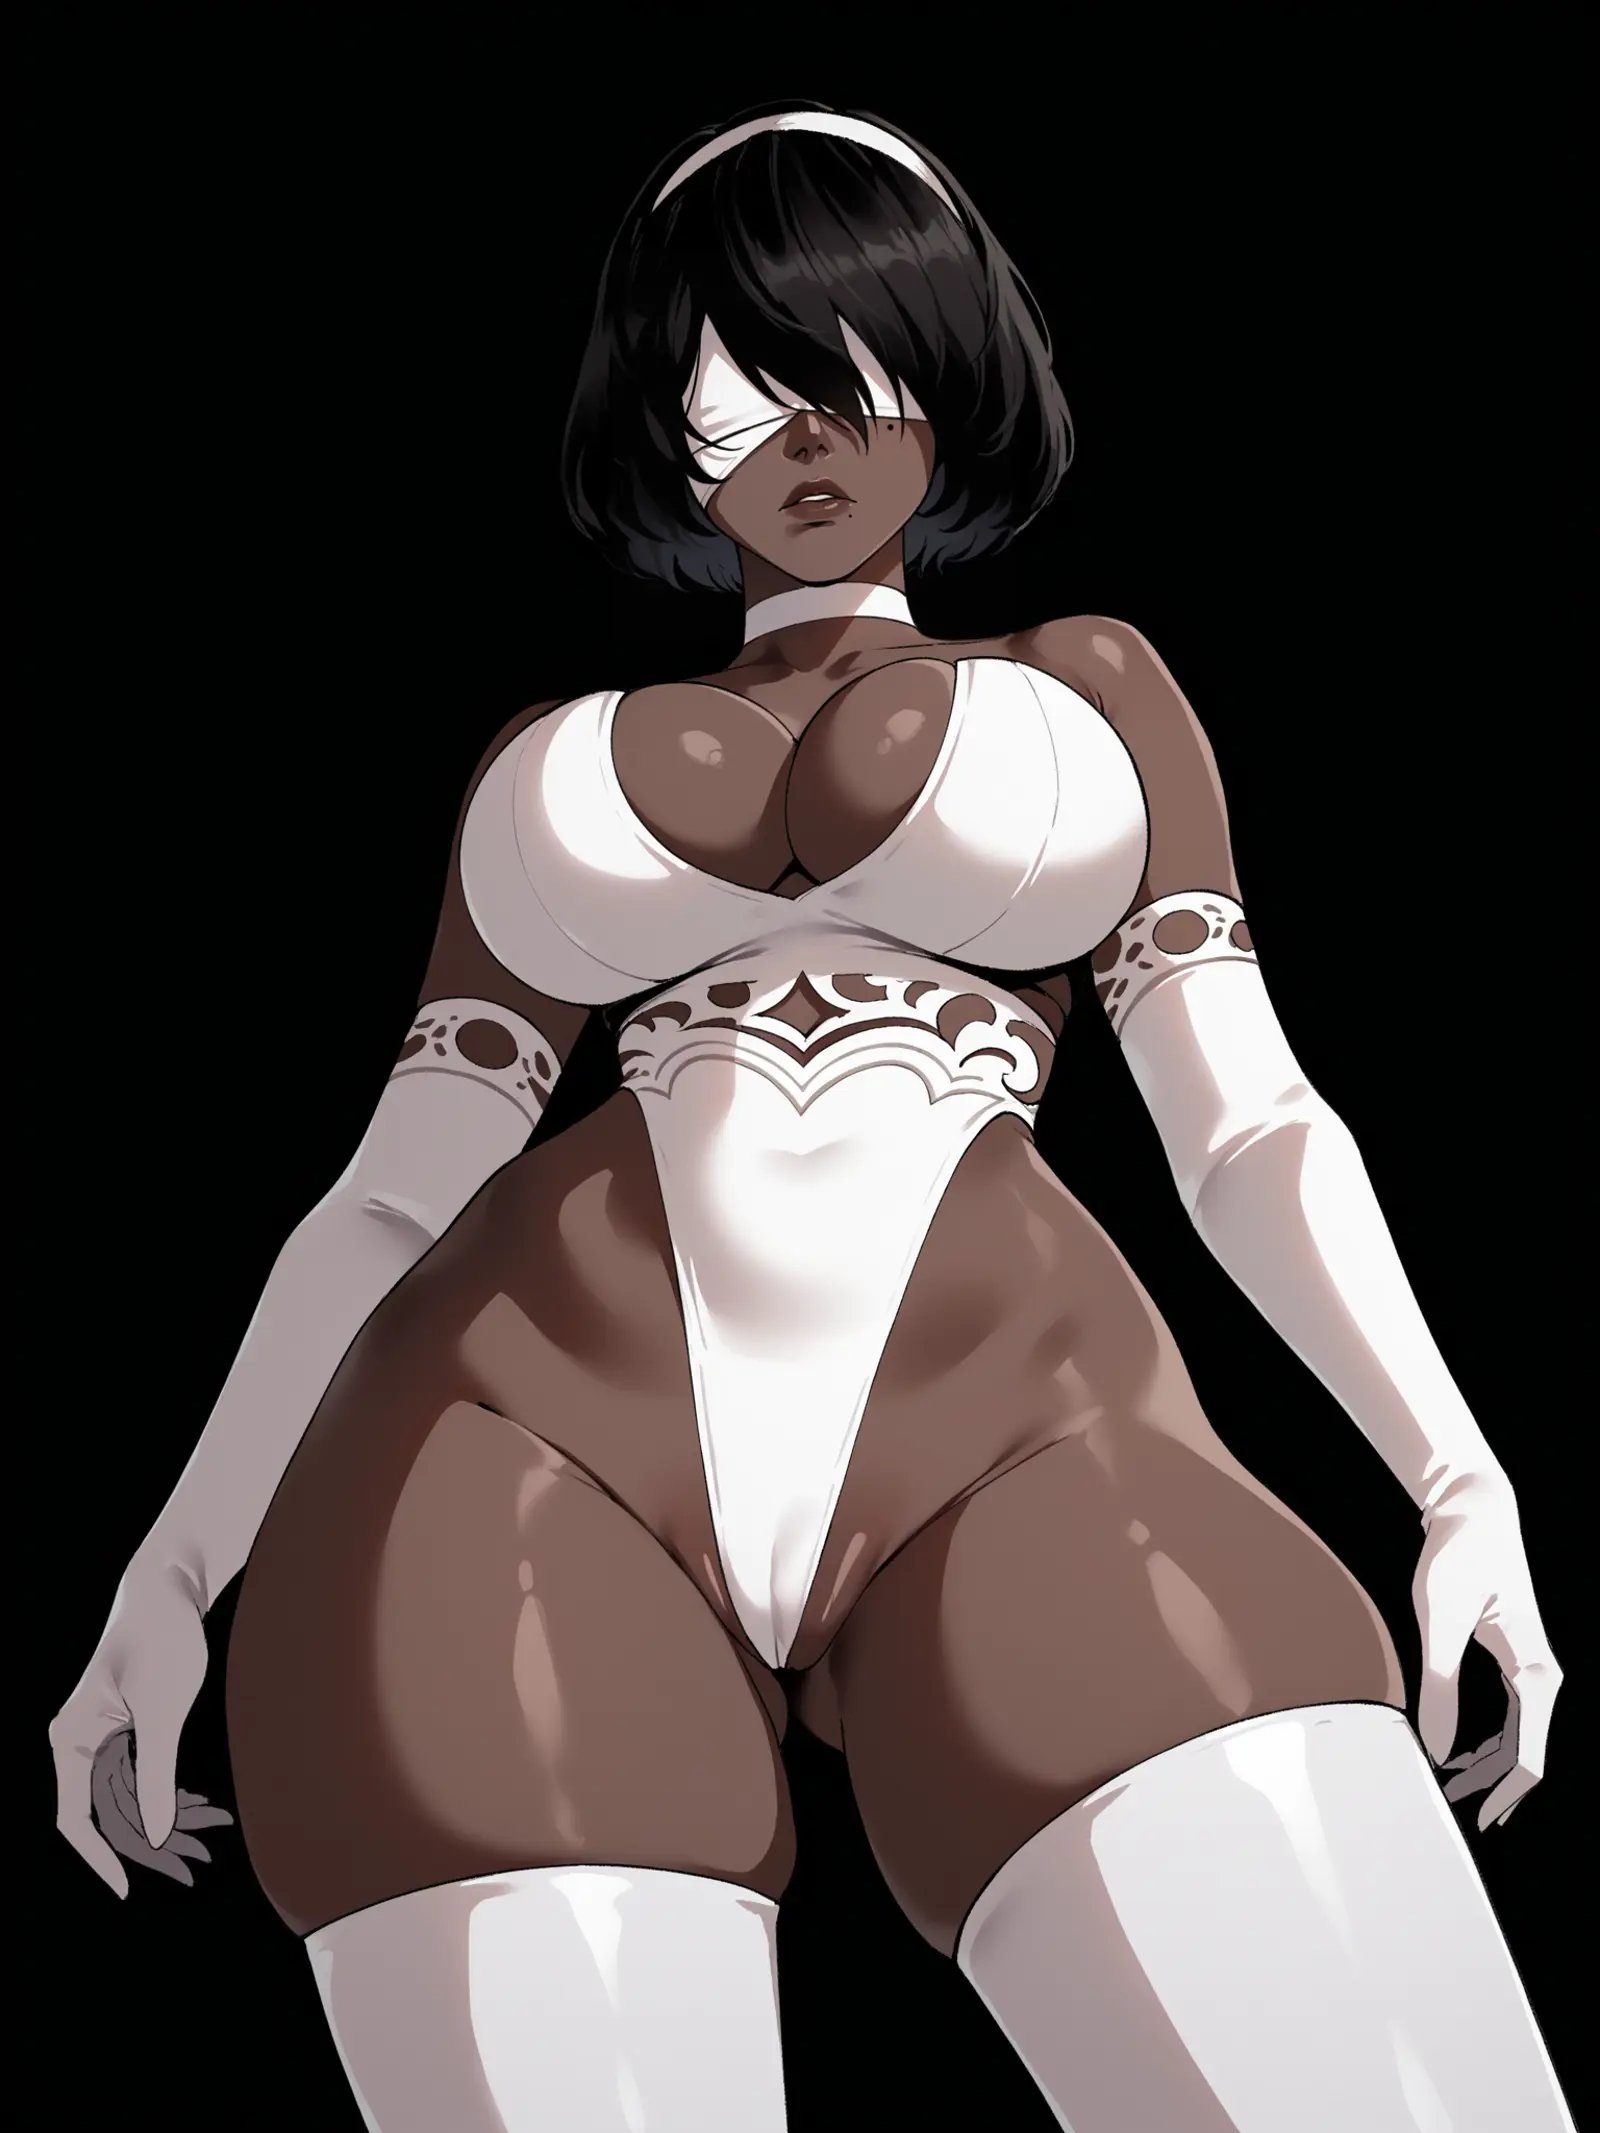 score_9, score_8_up, score_7_up, score_6_up, score_5_up, score_4_up, rating_safe,BREAK1girl, (dark skin:1.2), black skin, yorha no. 2 type b, (black hair:1.2), white blindflod, mole under mouthm white choker,BREAKstanding, huge breasts, skinny, white leotard, pussy peek, partially visible vulva, white elbow gloves, white thigh boots,BREAKblack background, dynamic angle, angled shot, shiny skin, <lora:Lunas-Nyantcha-Thiccwithaq-SDXL-A1:1>